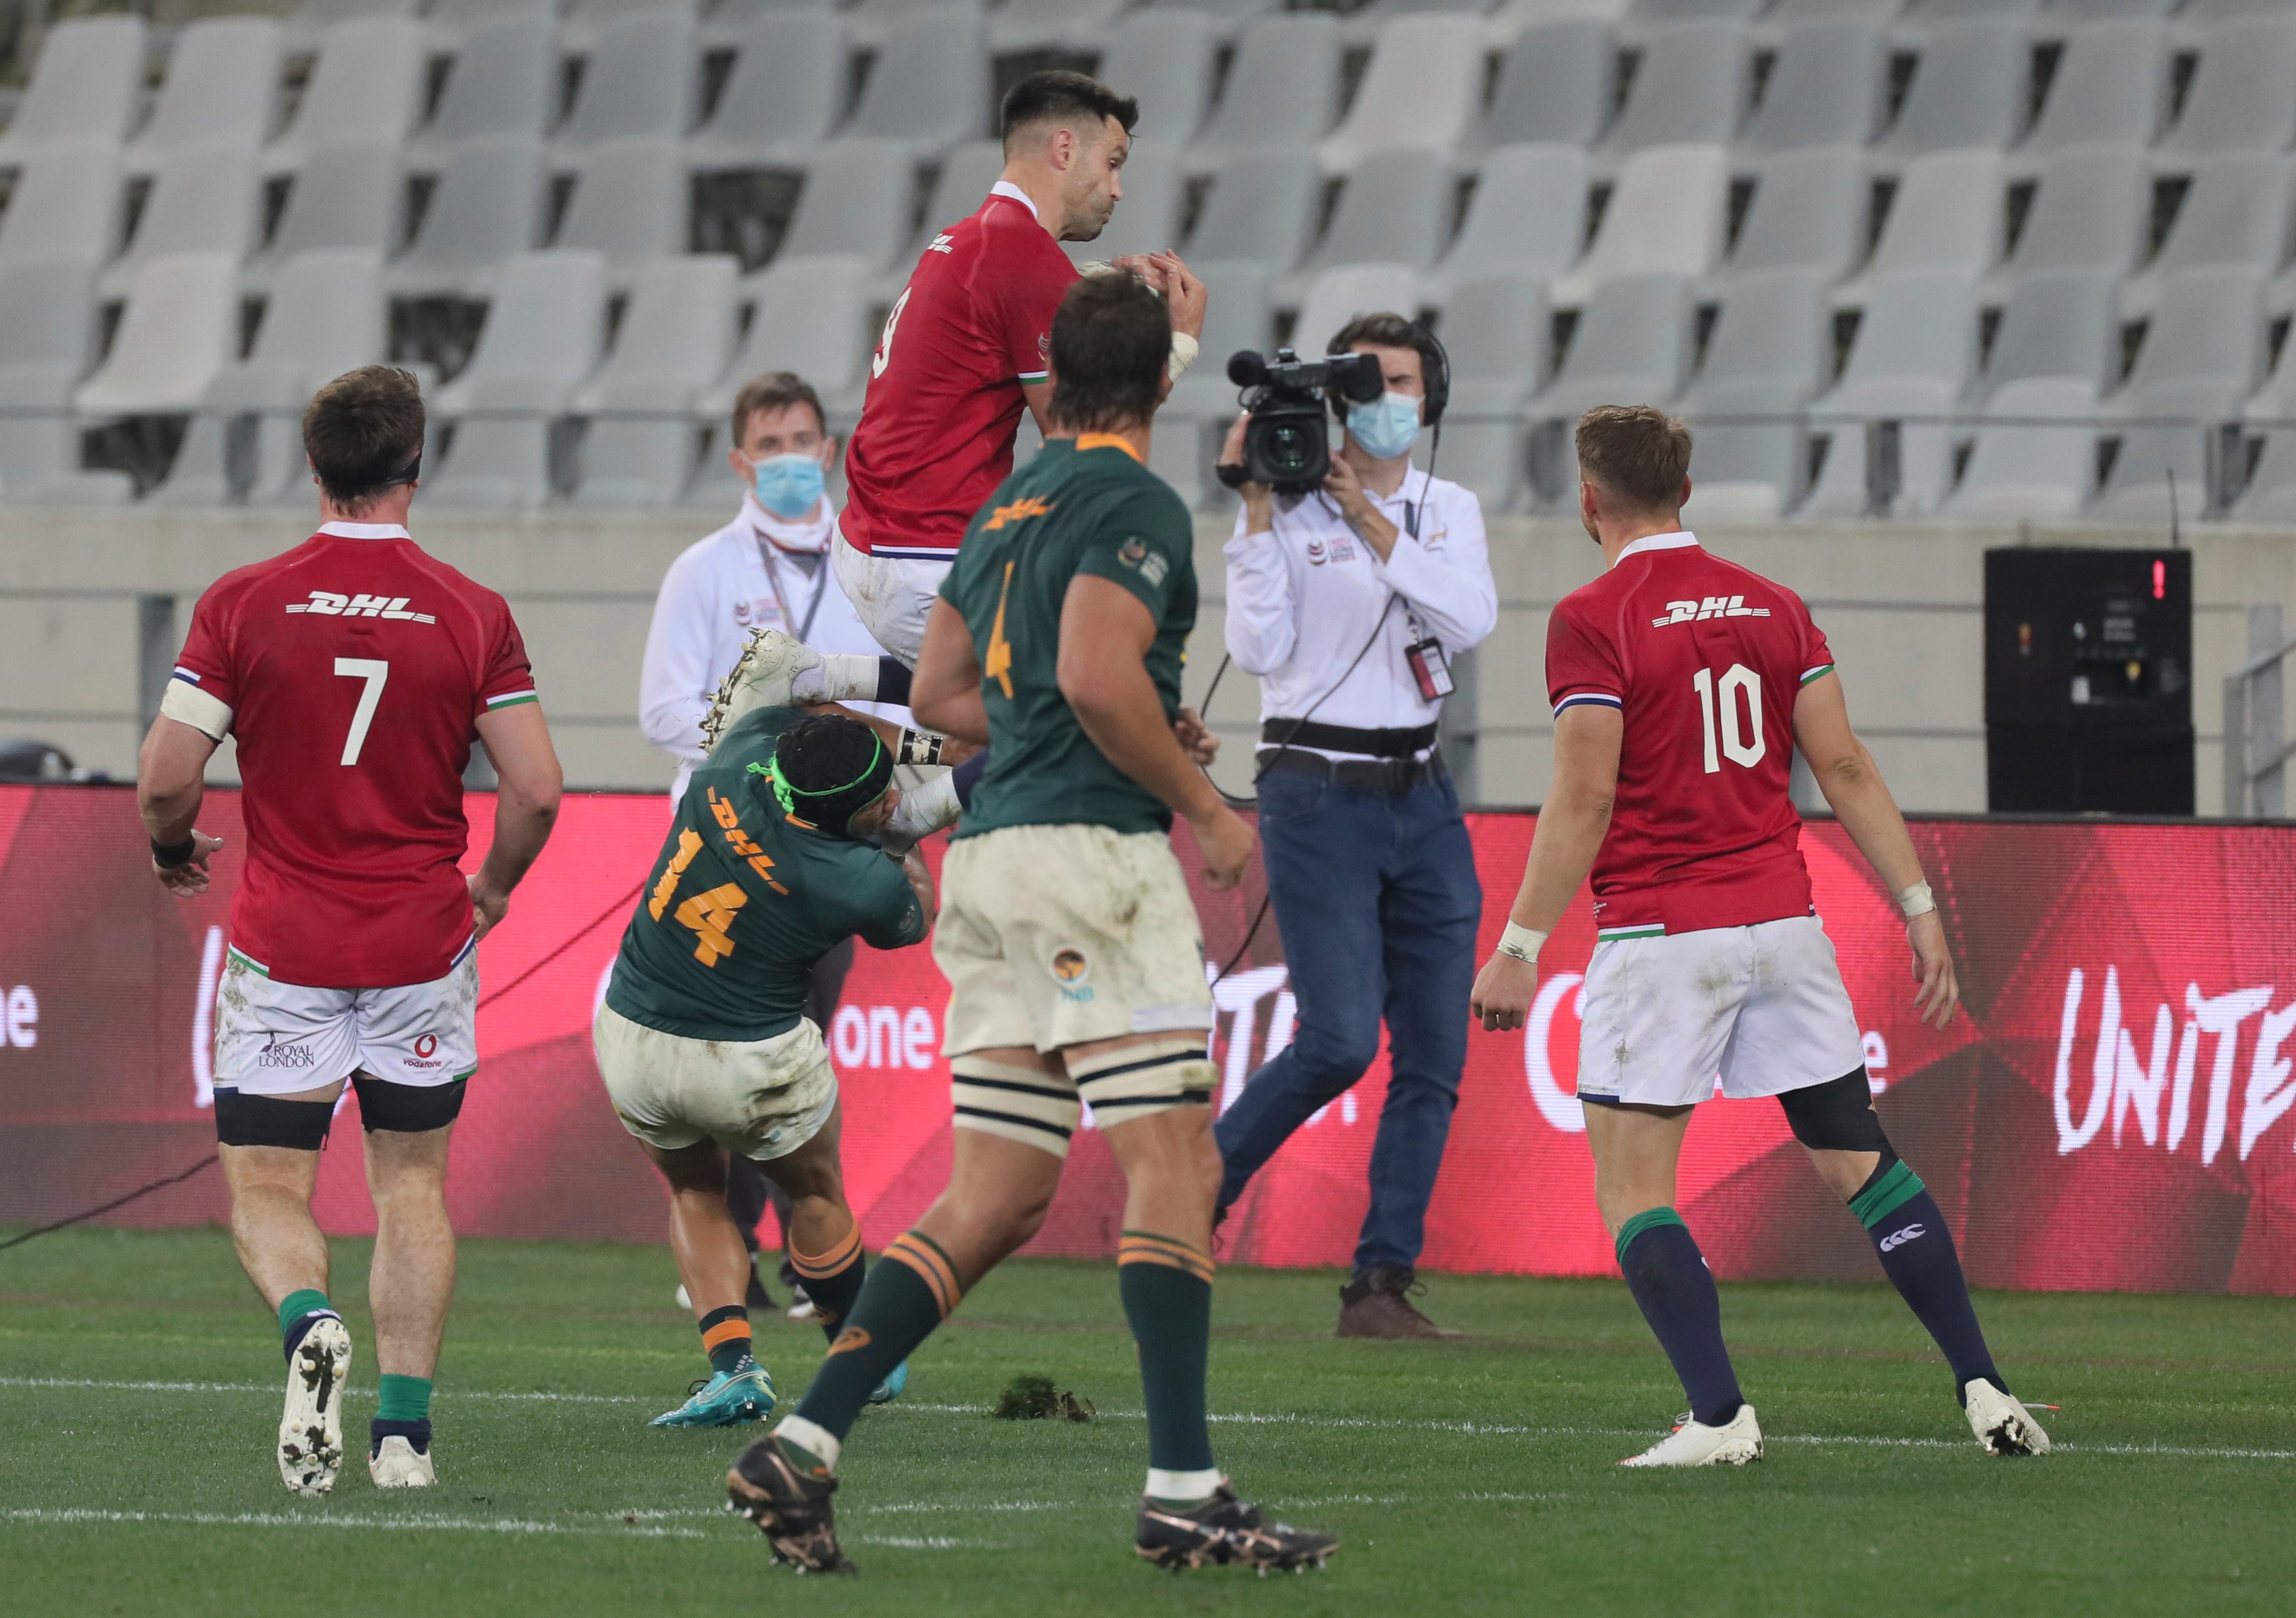 British and Irish Lions' Conor Murray, top, is late tackled by South Africa's Cheslin Kolbe